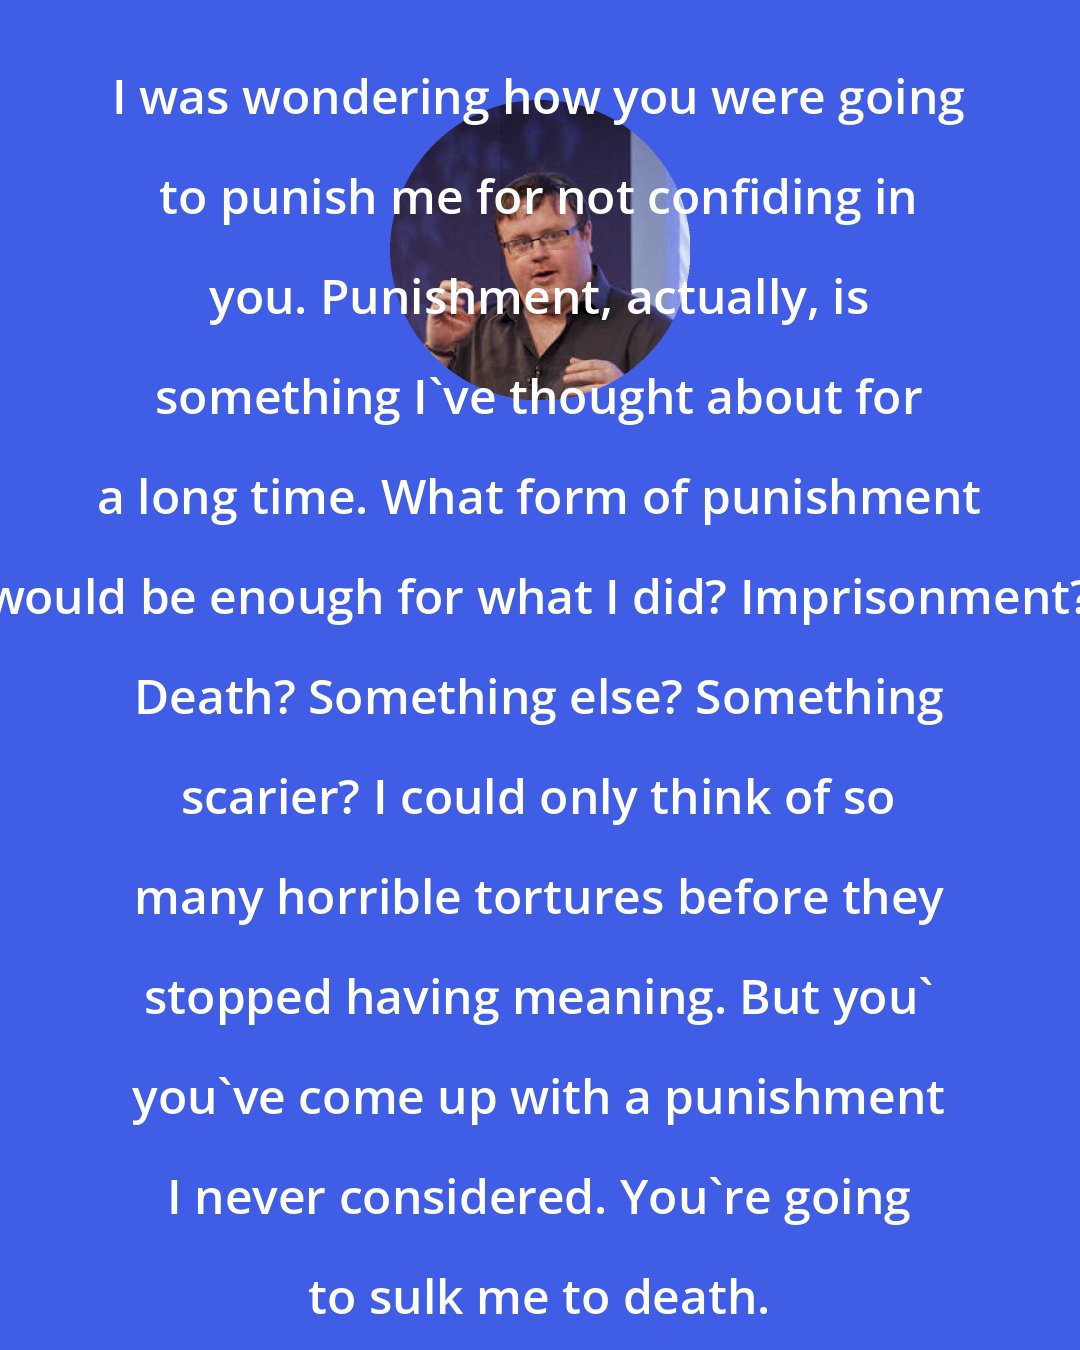 Derek Landy: I was wondering how you were going to punish me for not confiding in you. Punishment, actually, is something I've thought about for a long time. What form of punishment would be enough for what I did? Imprisonment? Death? Something else? Something scarier? I could only think of so many horrible tortures before they stopped having meaning. But you' you've come up with a punishment I never considered. You're going to sulk me to death.